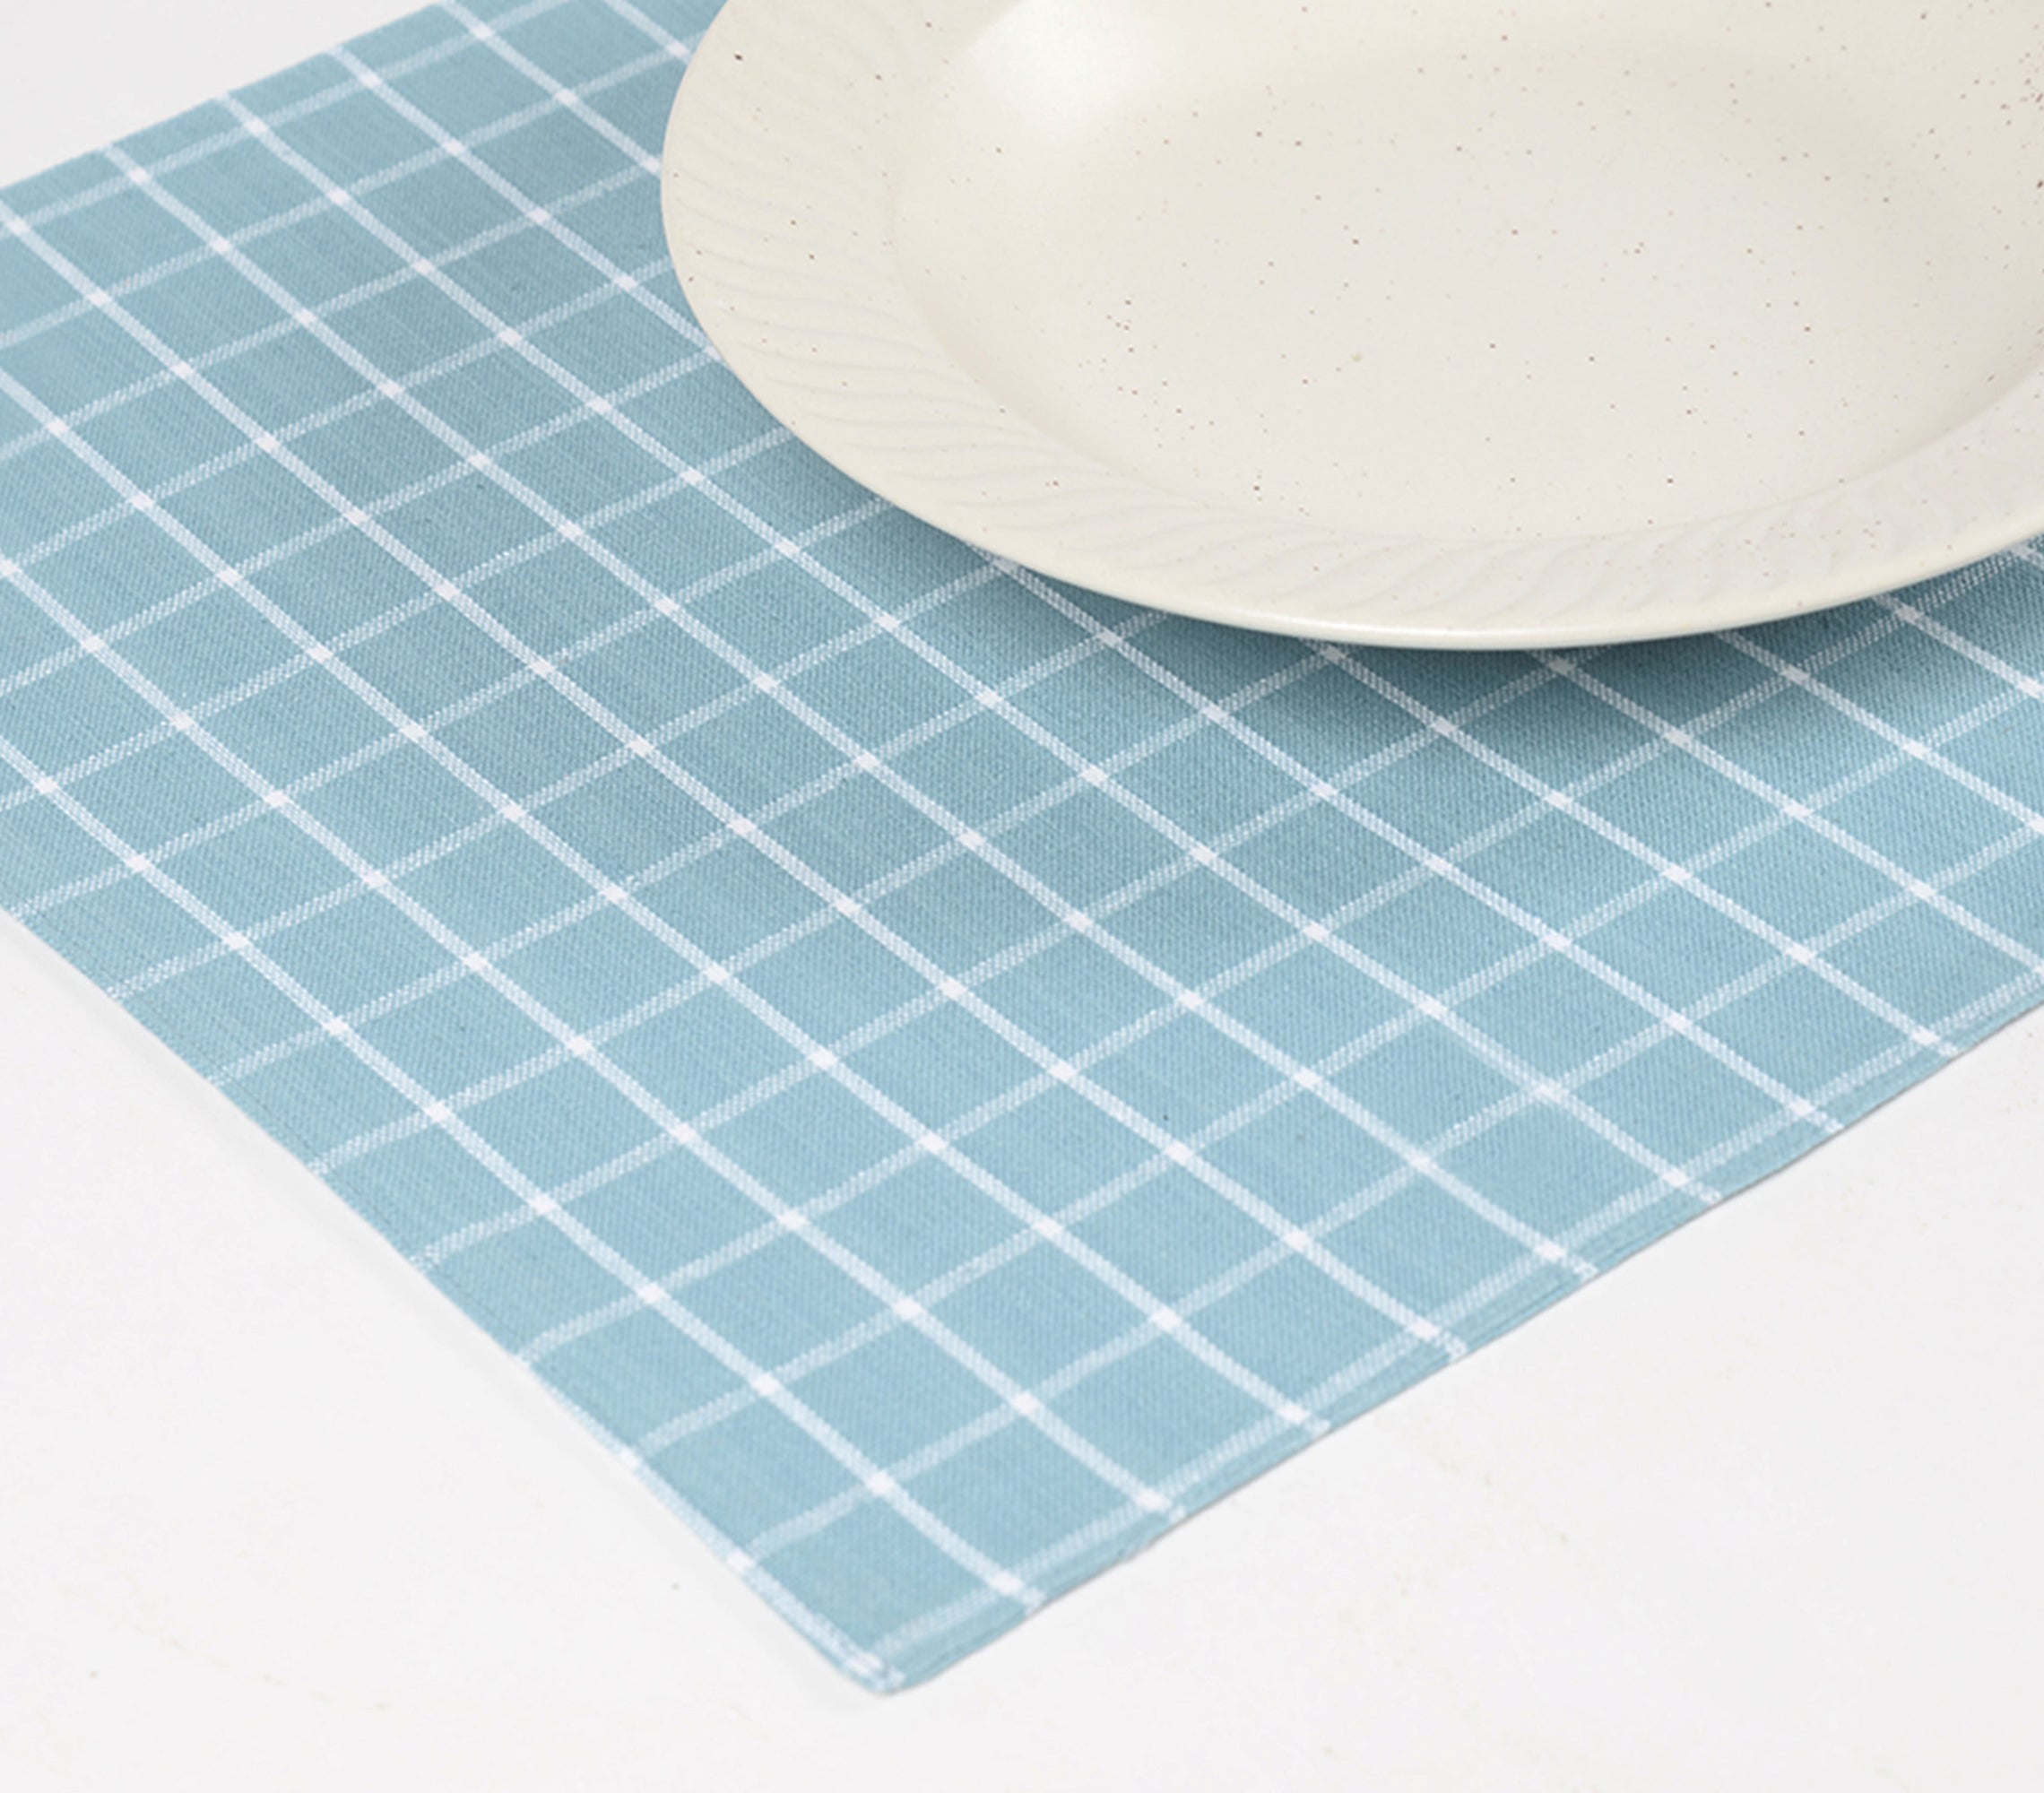 Checkered Sky Cotton Placemats (set of 4), 18.5 X 13 inch- 2 SETS